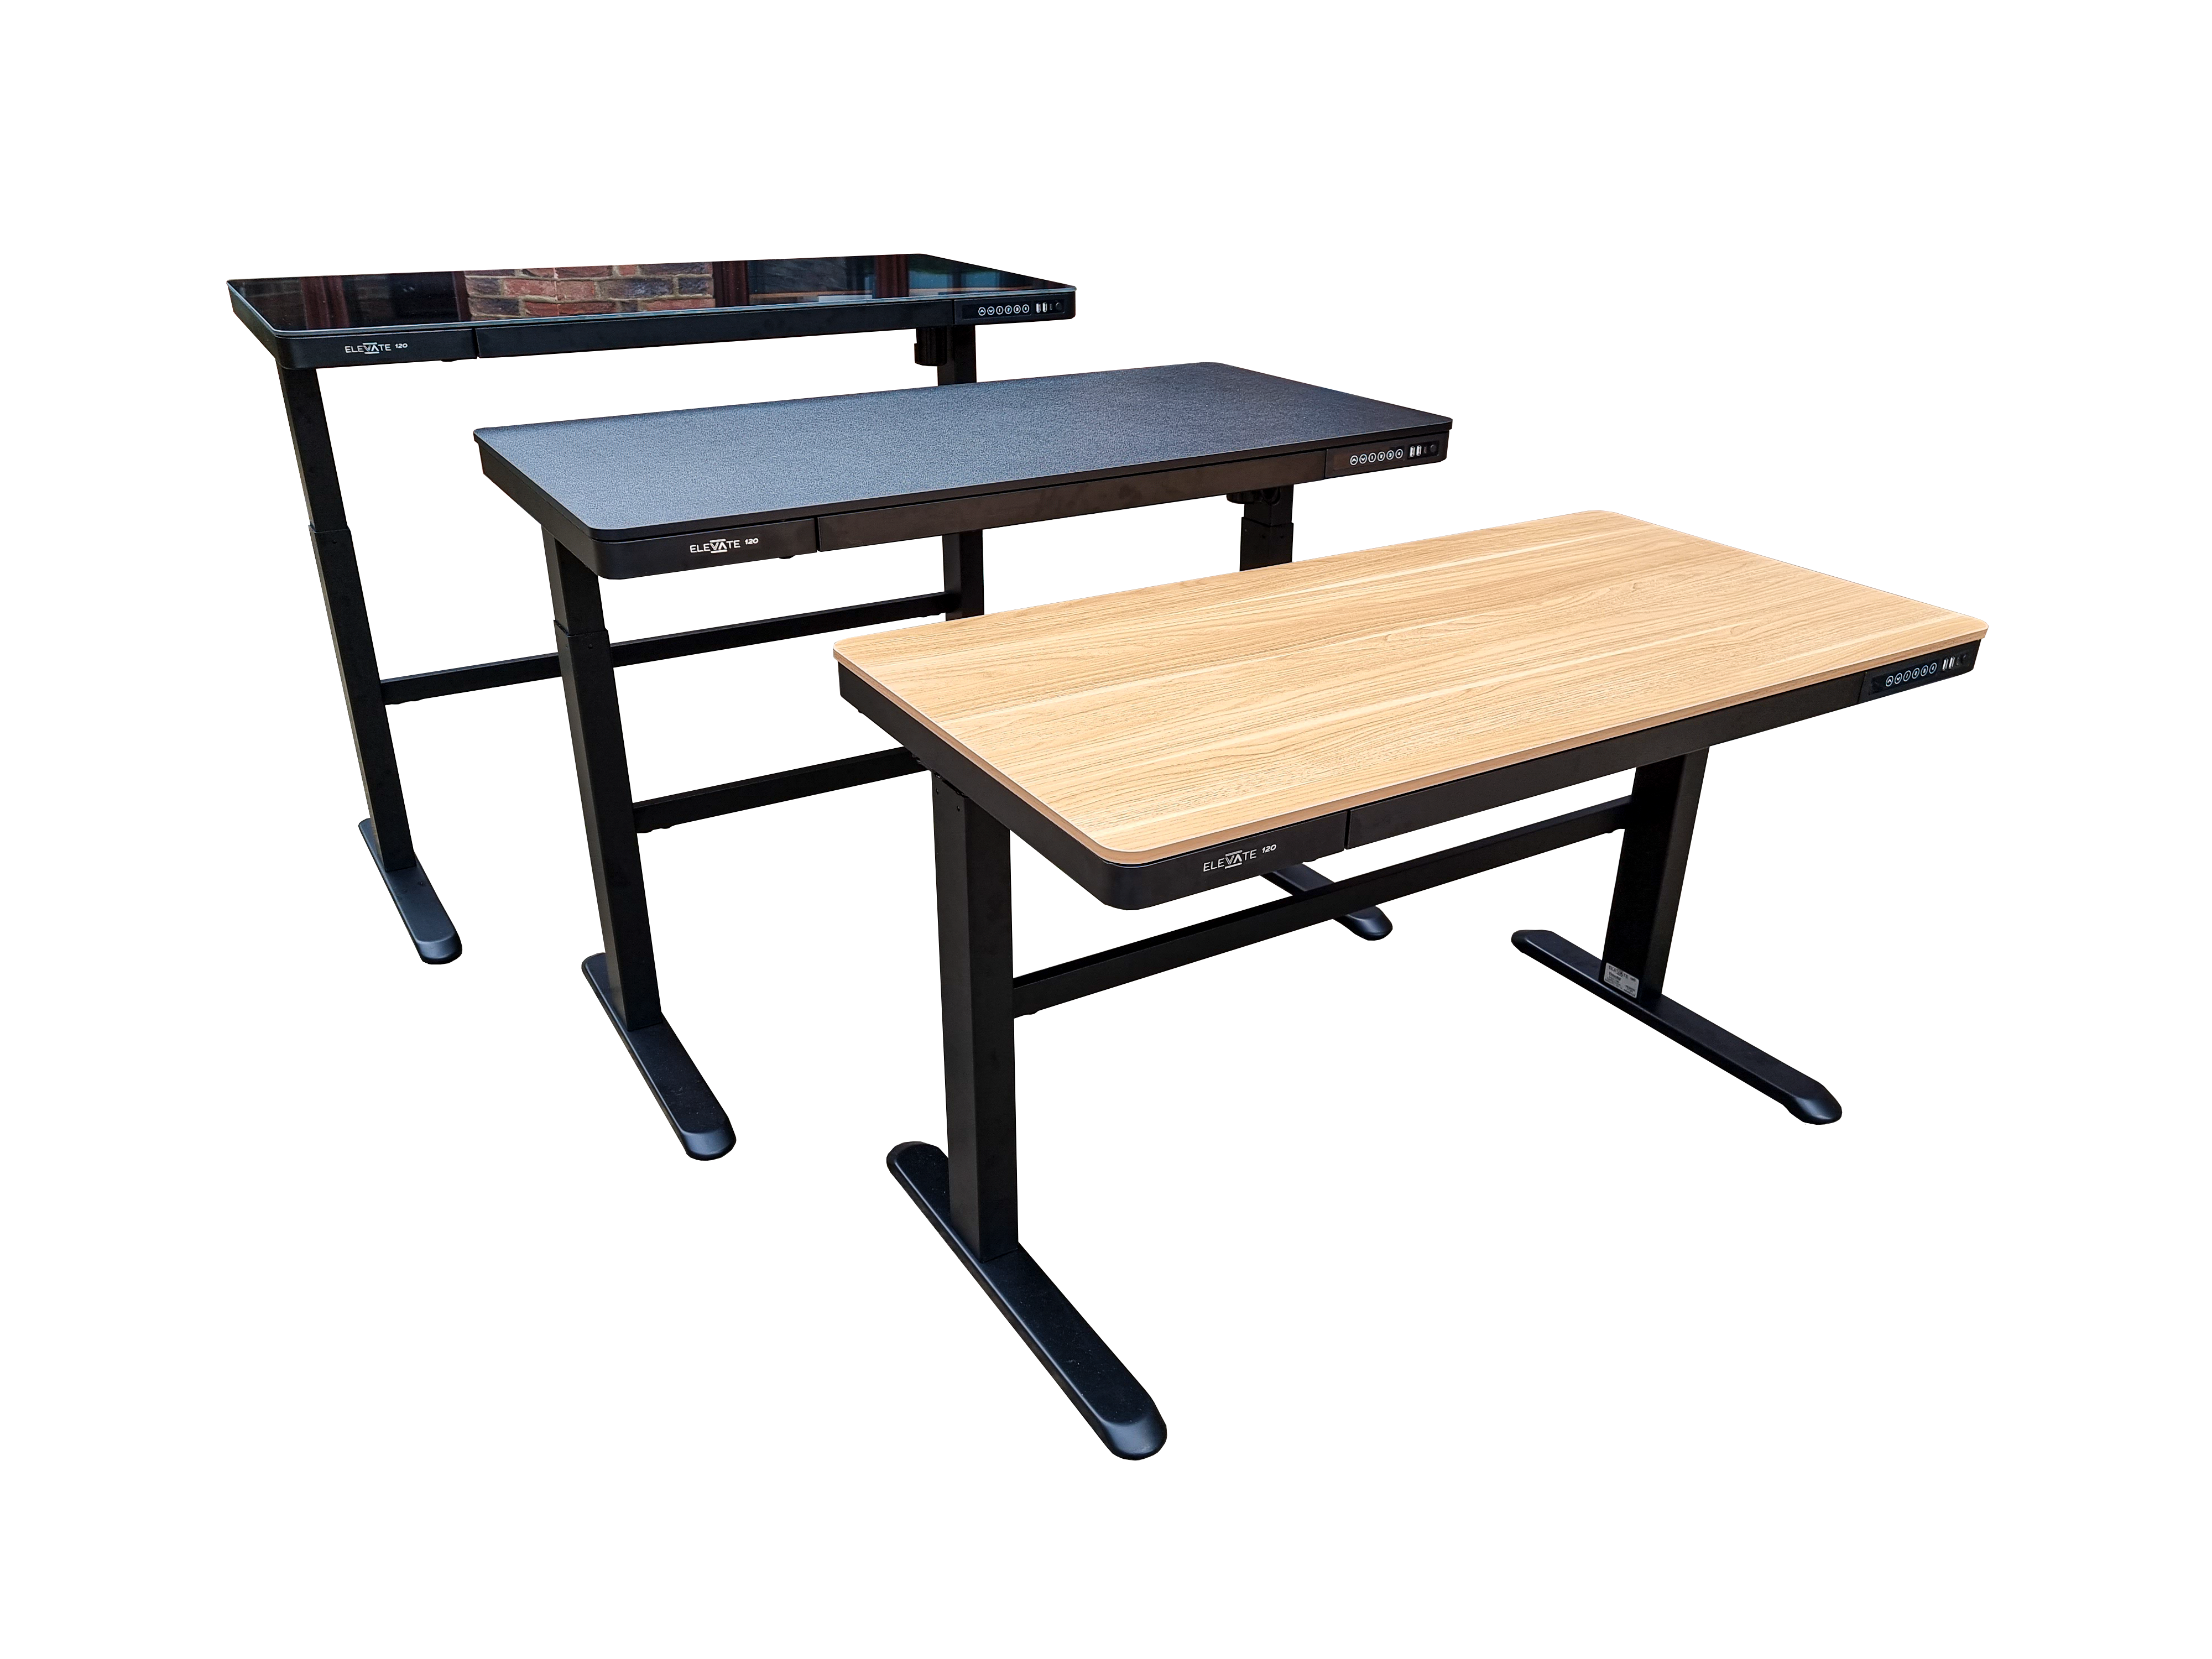 3 Elevate sit stand desks all with black bases, one with a black top, one with an oak top and one with a black glass top